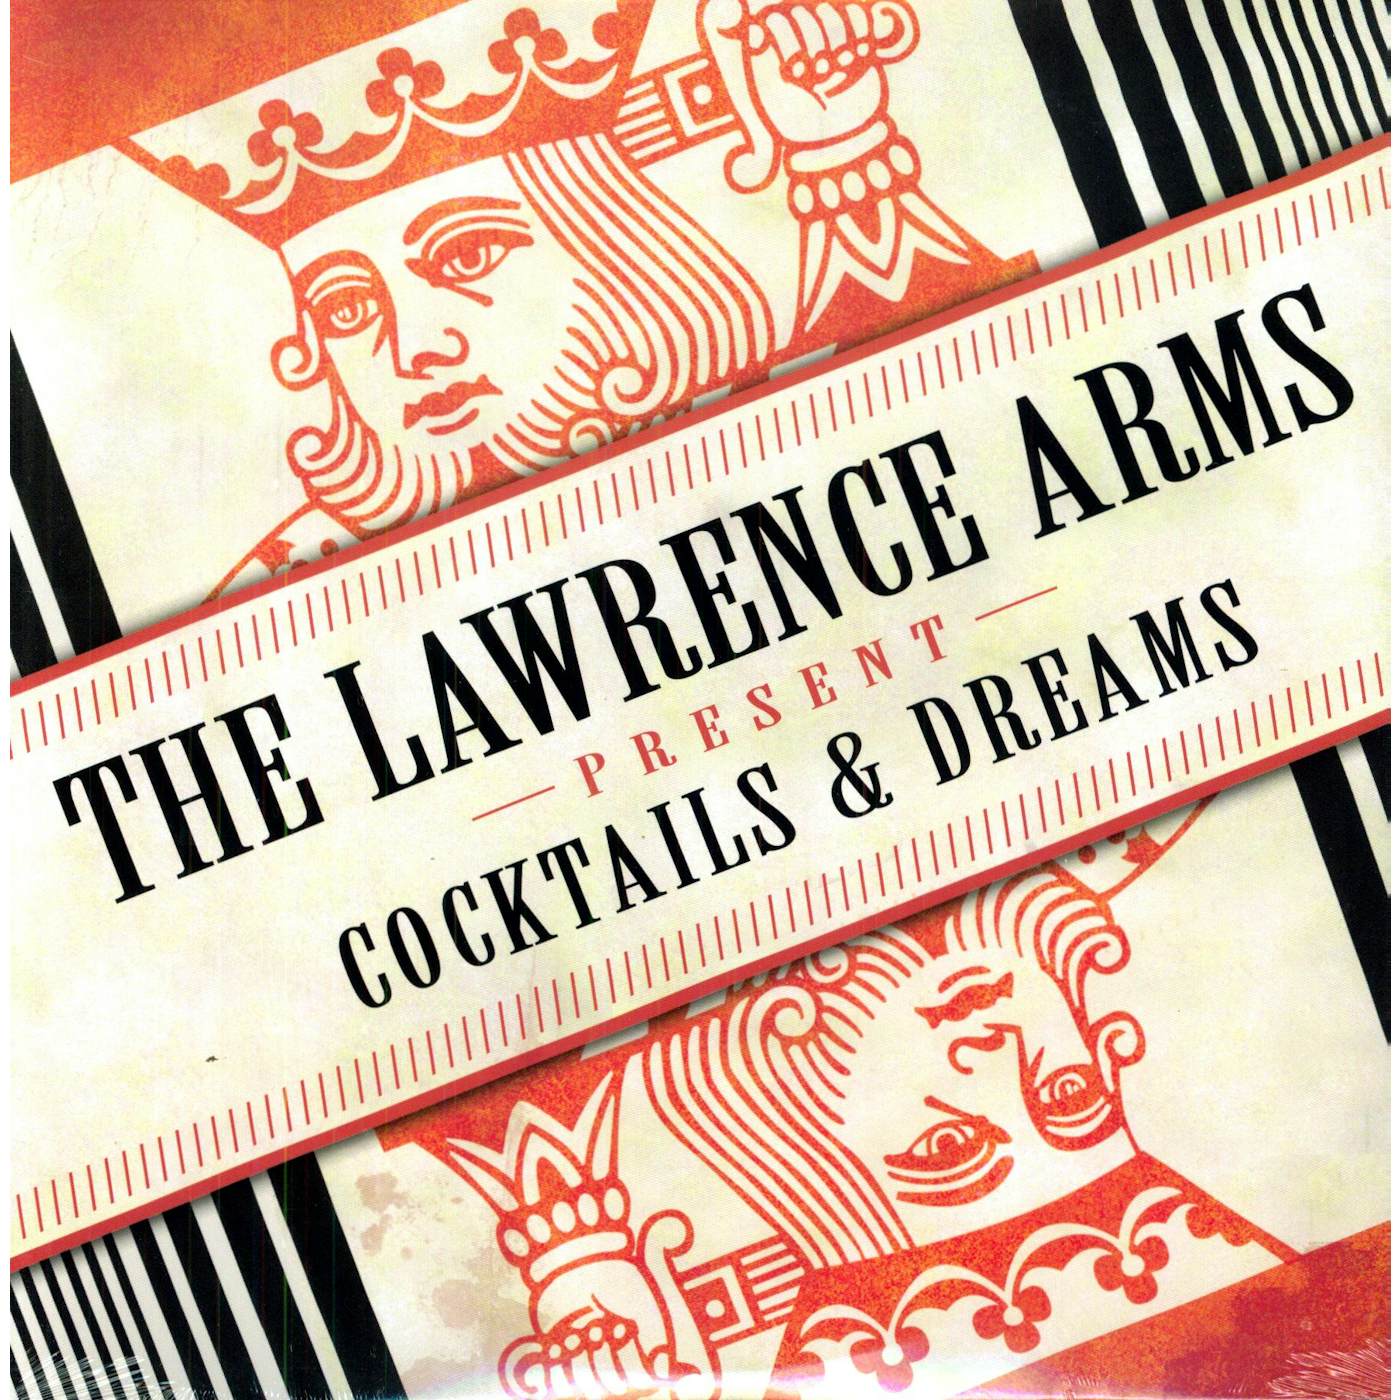 The Lawrence Arms Cocktails & Dreams Vinyl Record